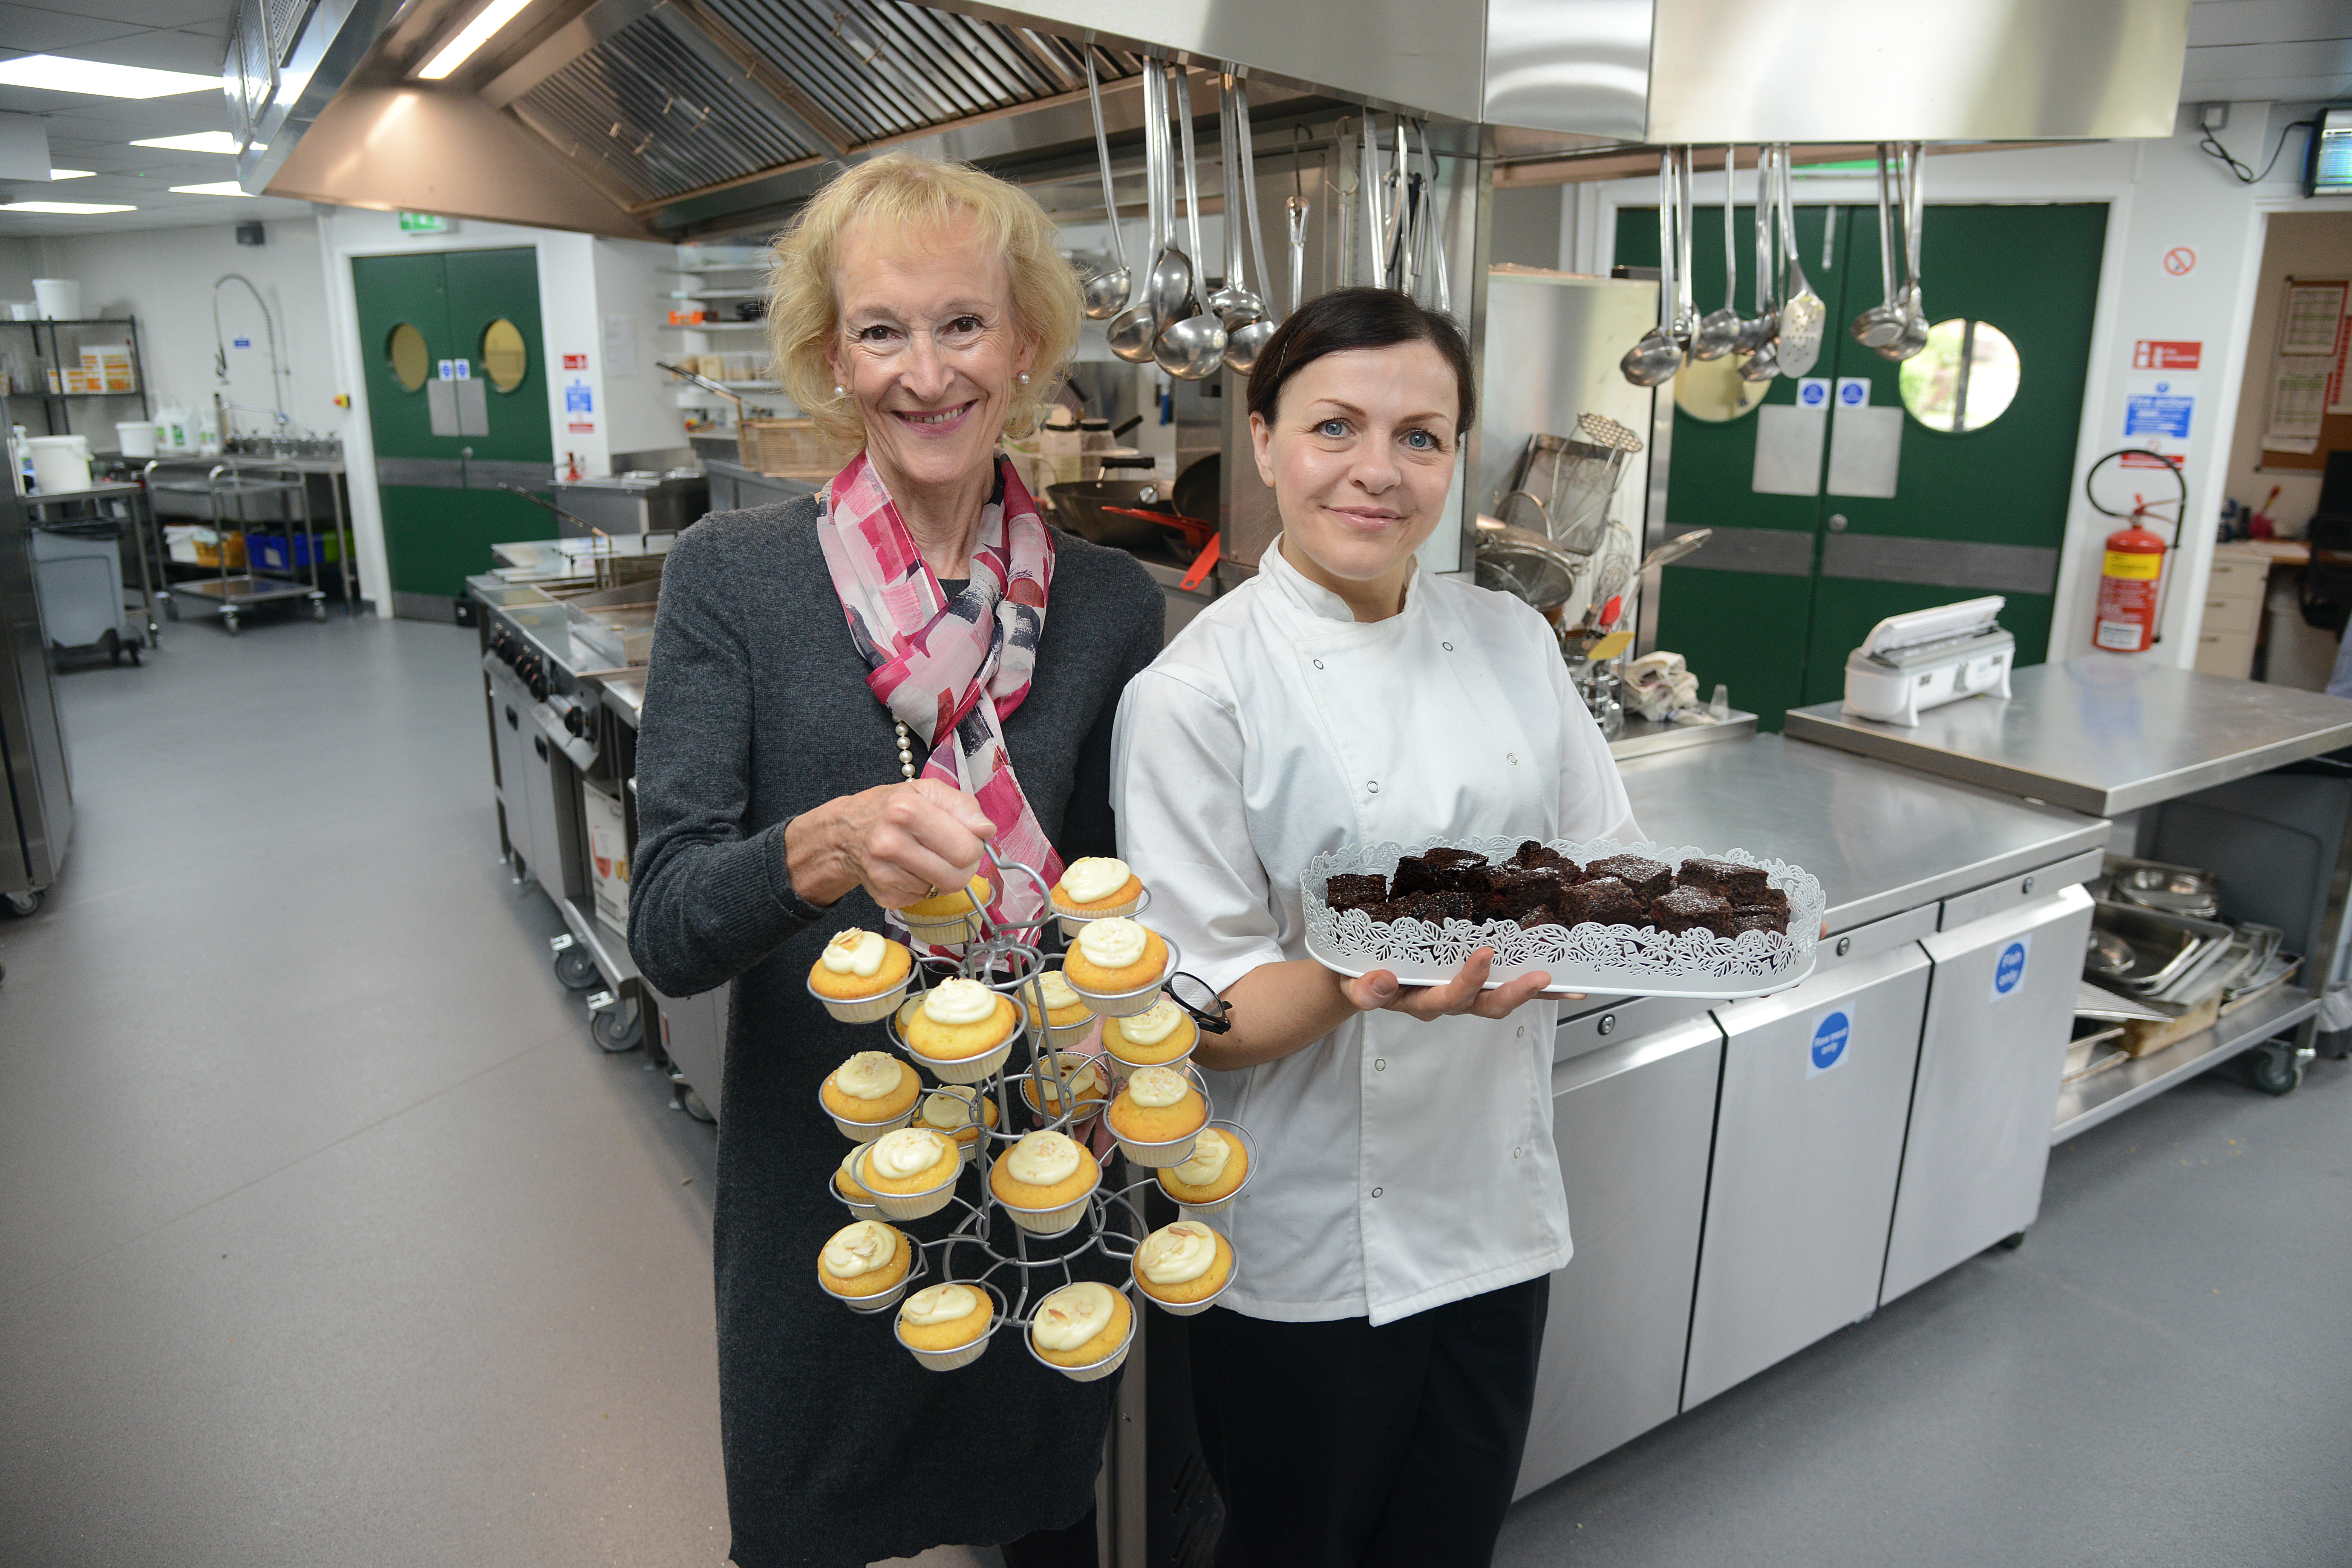 Masterchef winner opens Viewpoint’s state-of-the-art kitchen